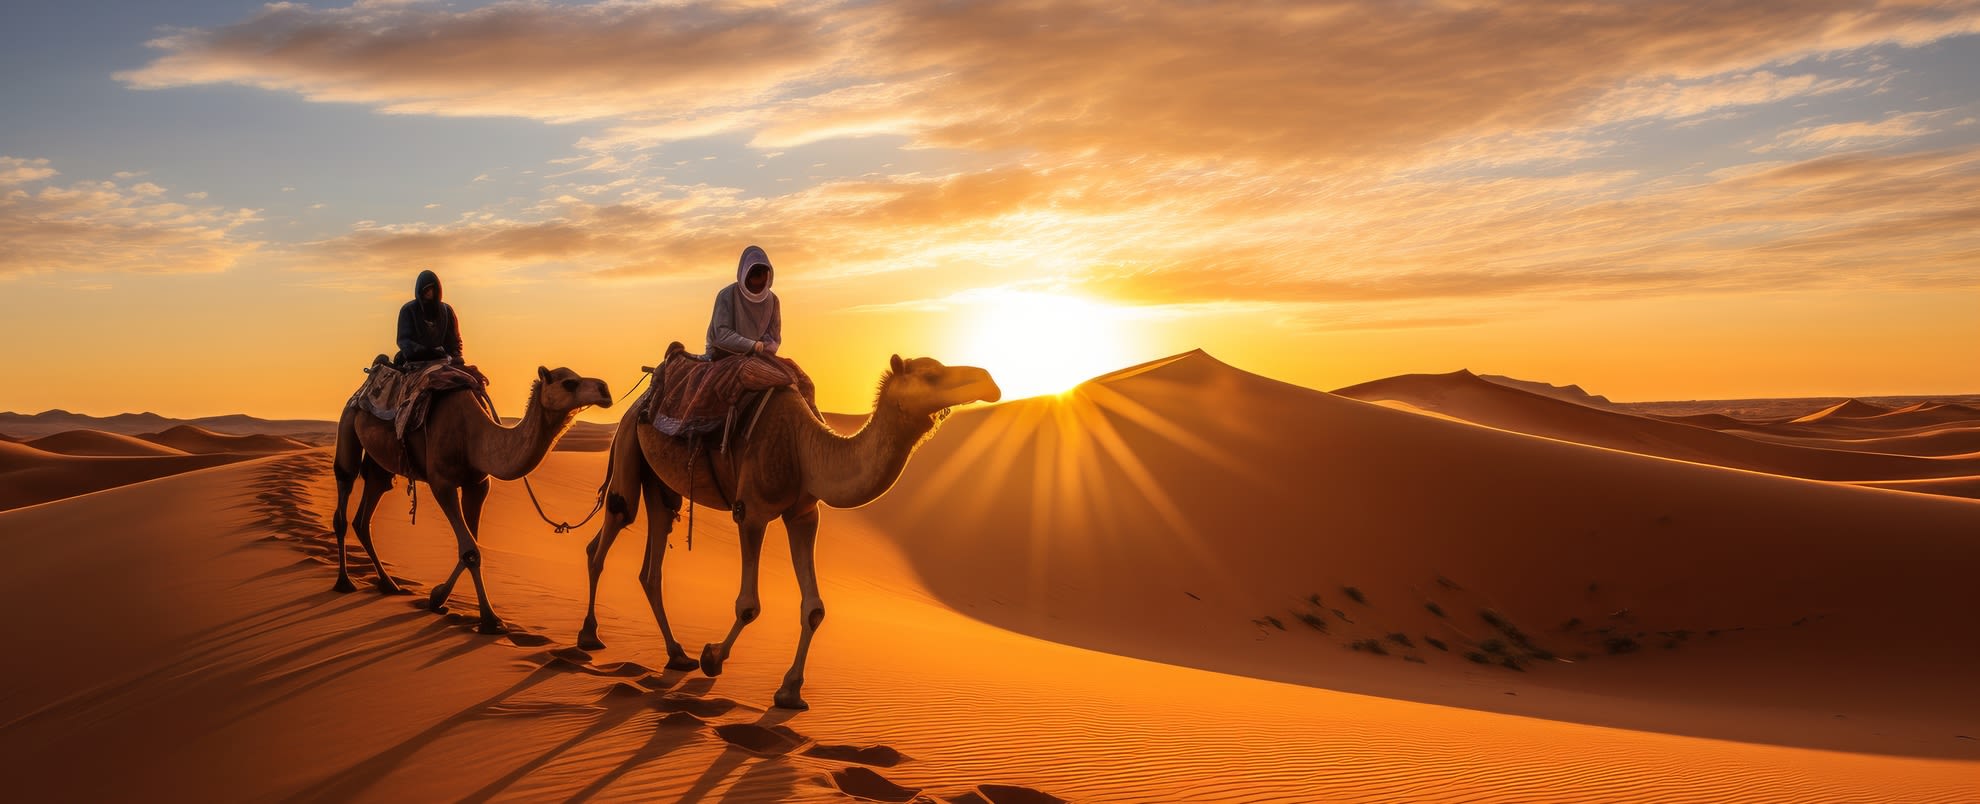 Image of a desert in Dubai, with two people riding camels. 